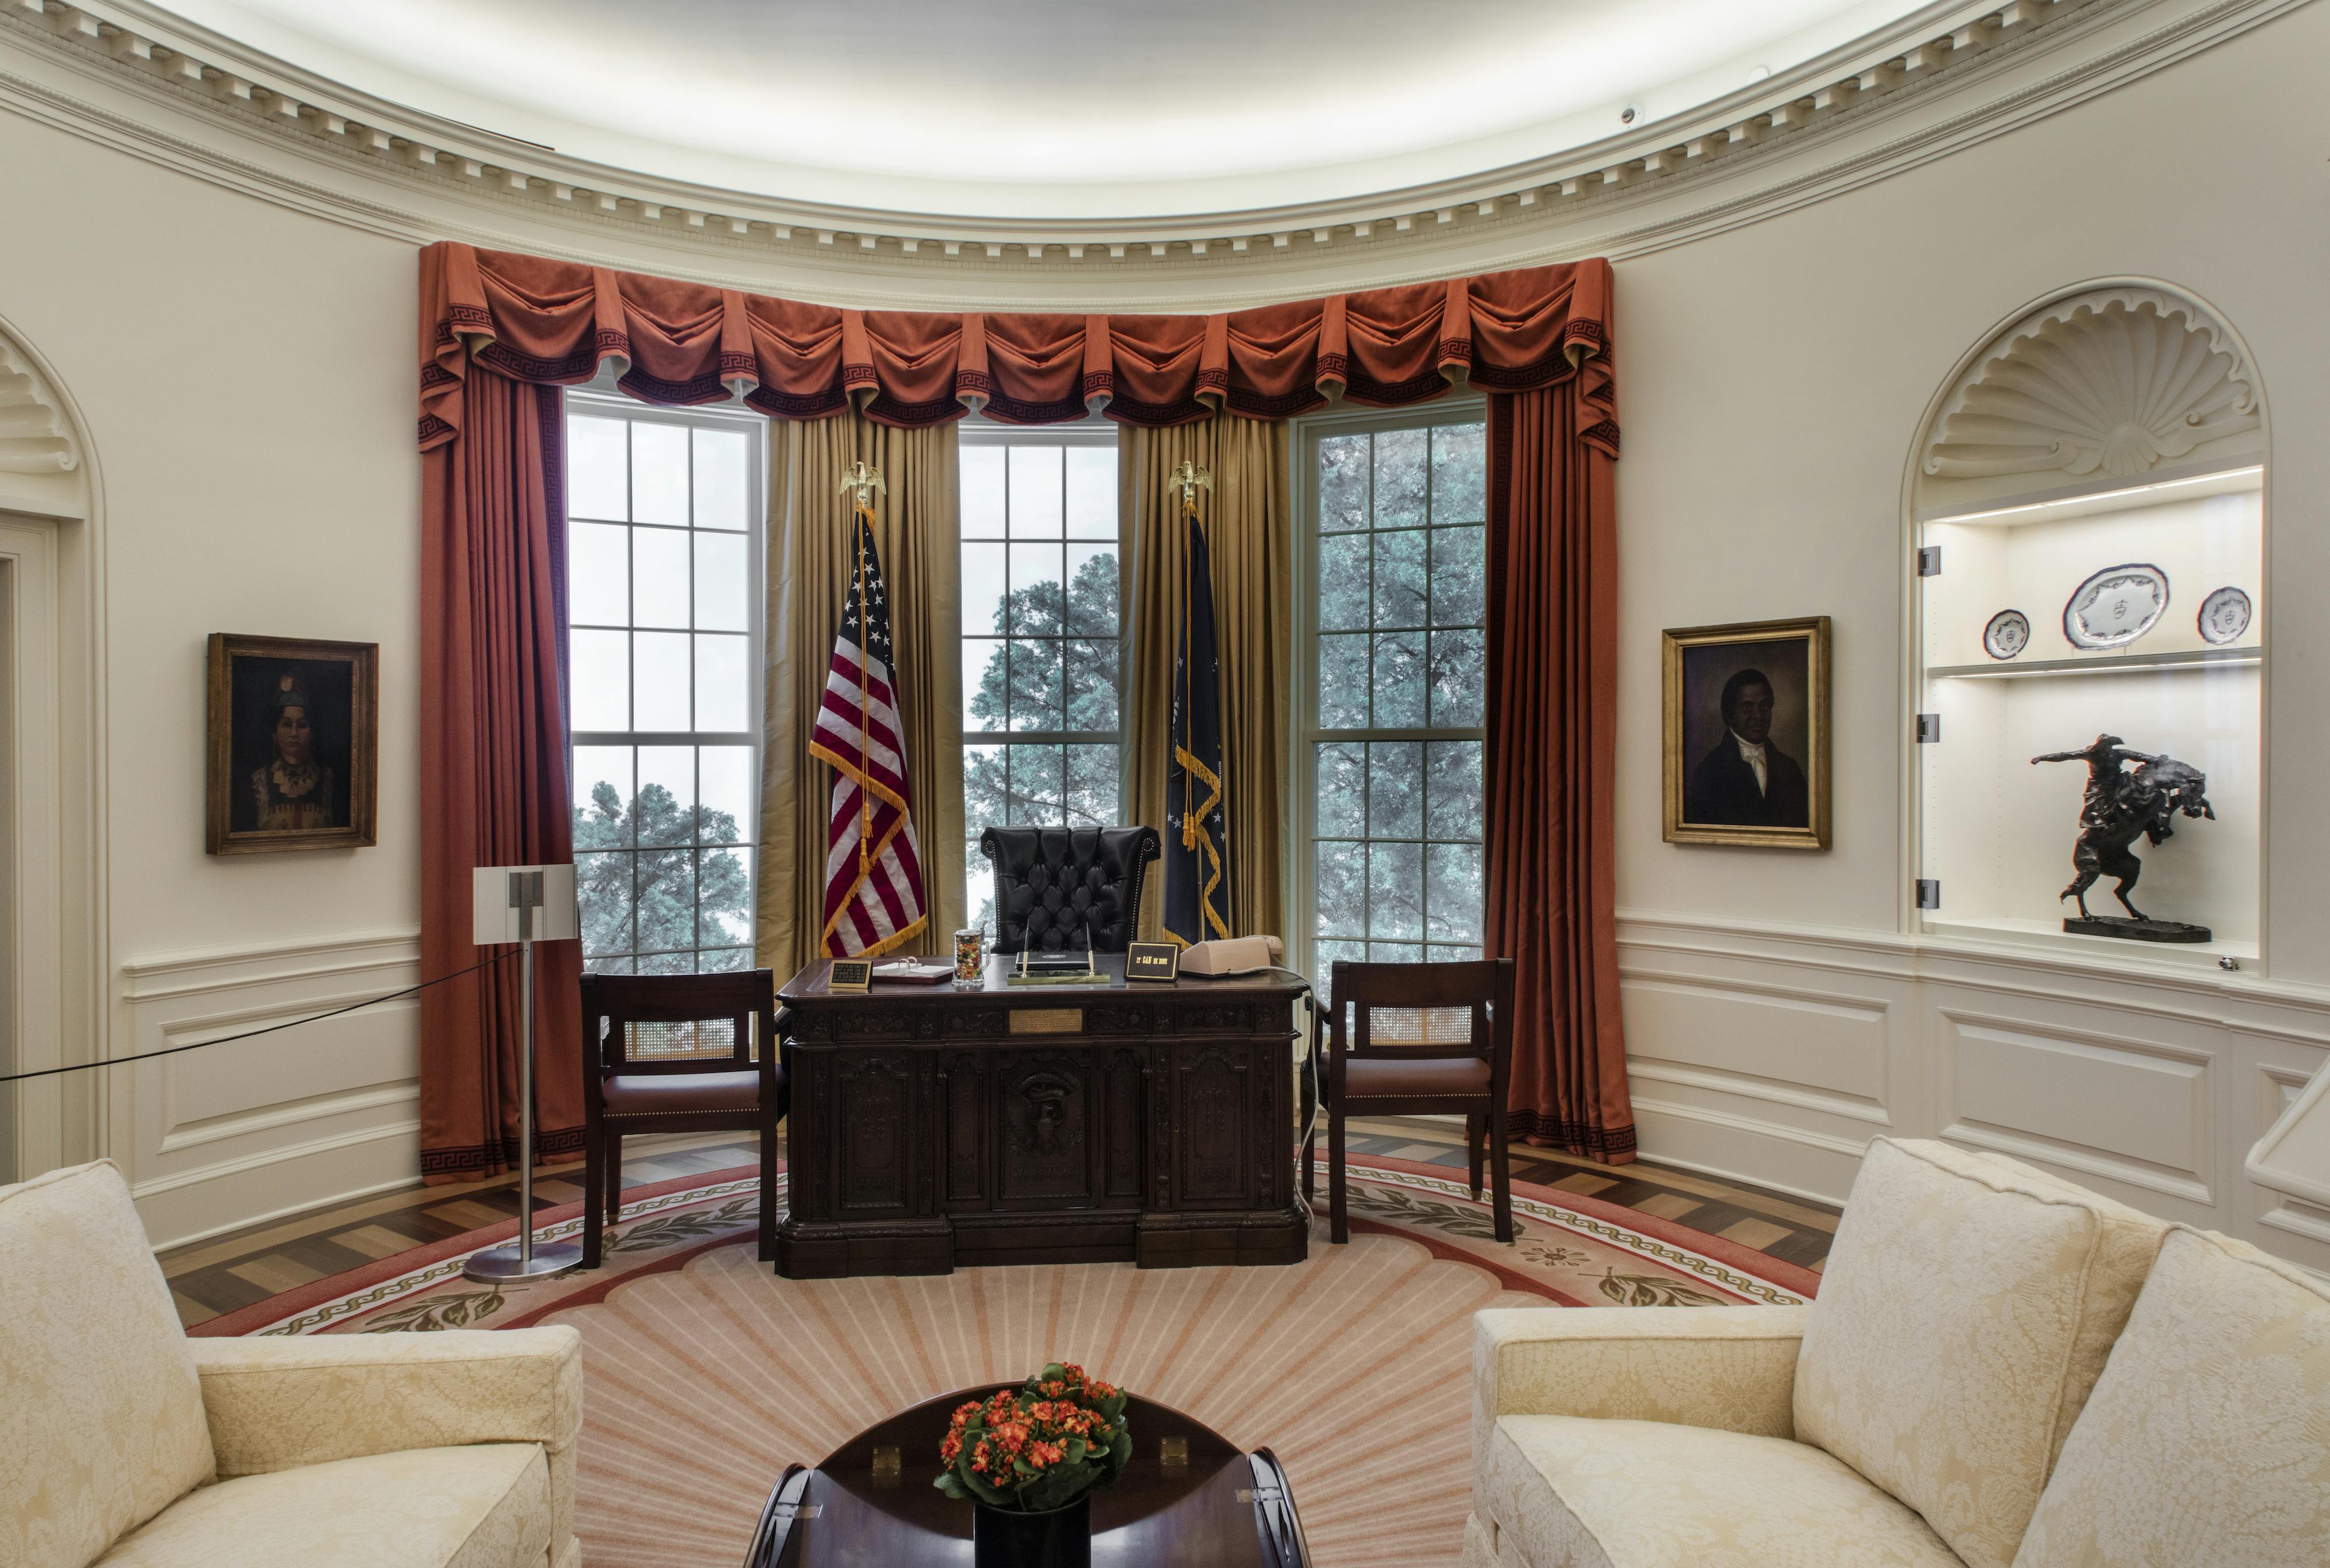 Meet the Presidents and the Oval Office | New-York Historical Society